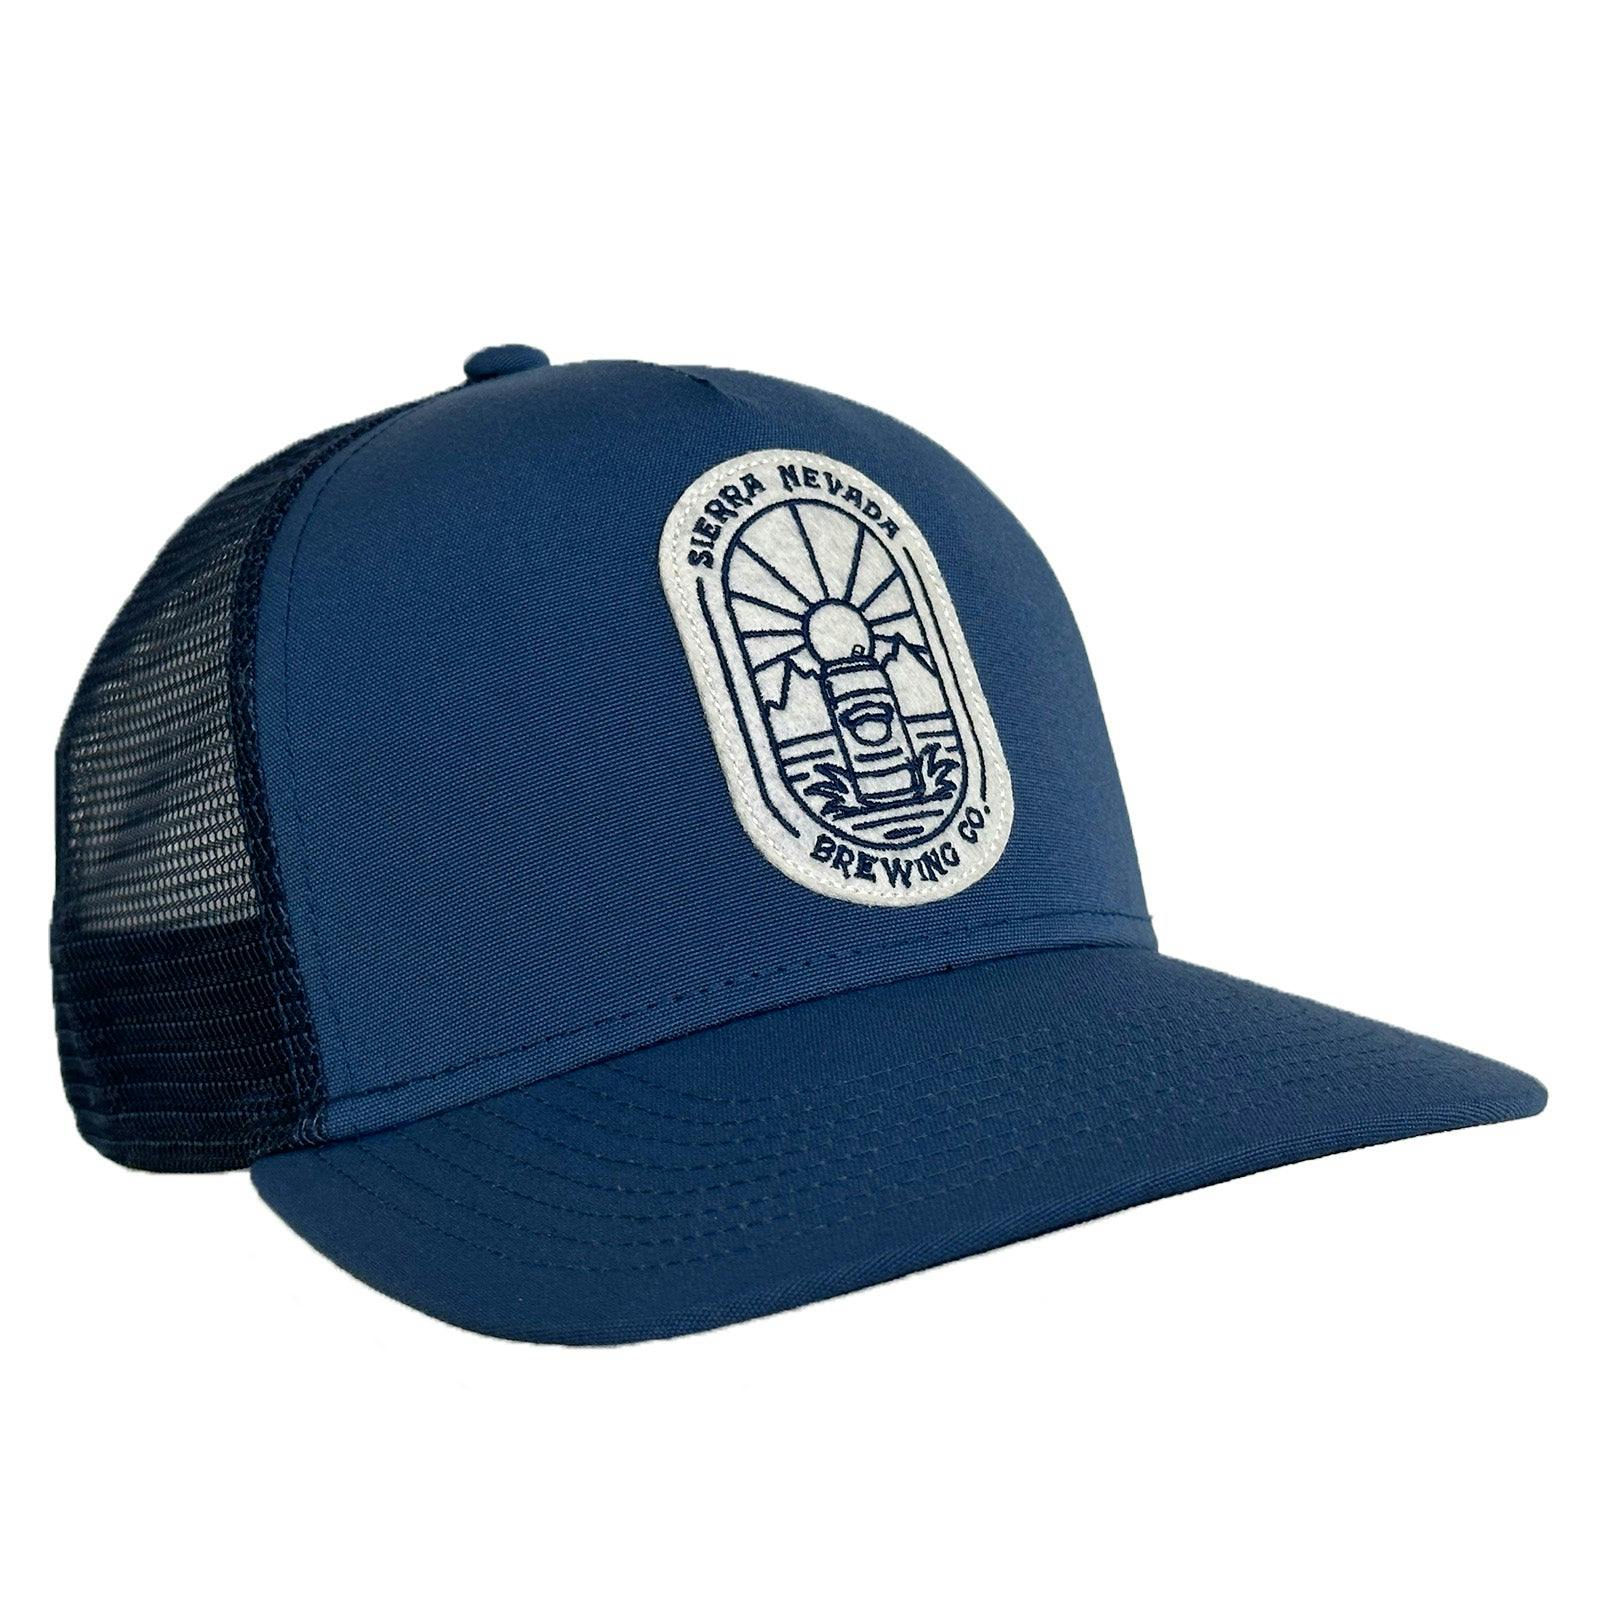 Vintage Trucker Hat: Old Style Classic Draft Beer